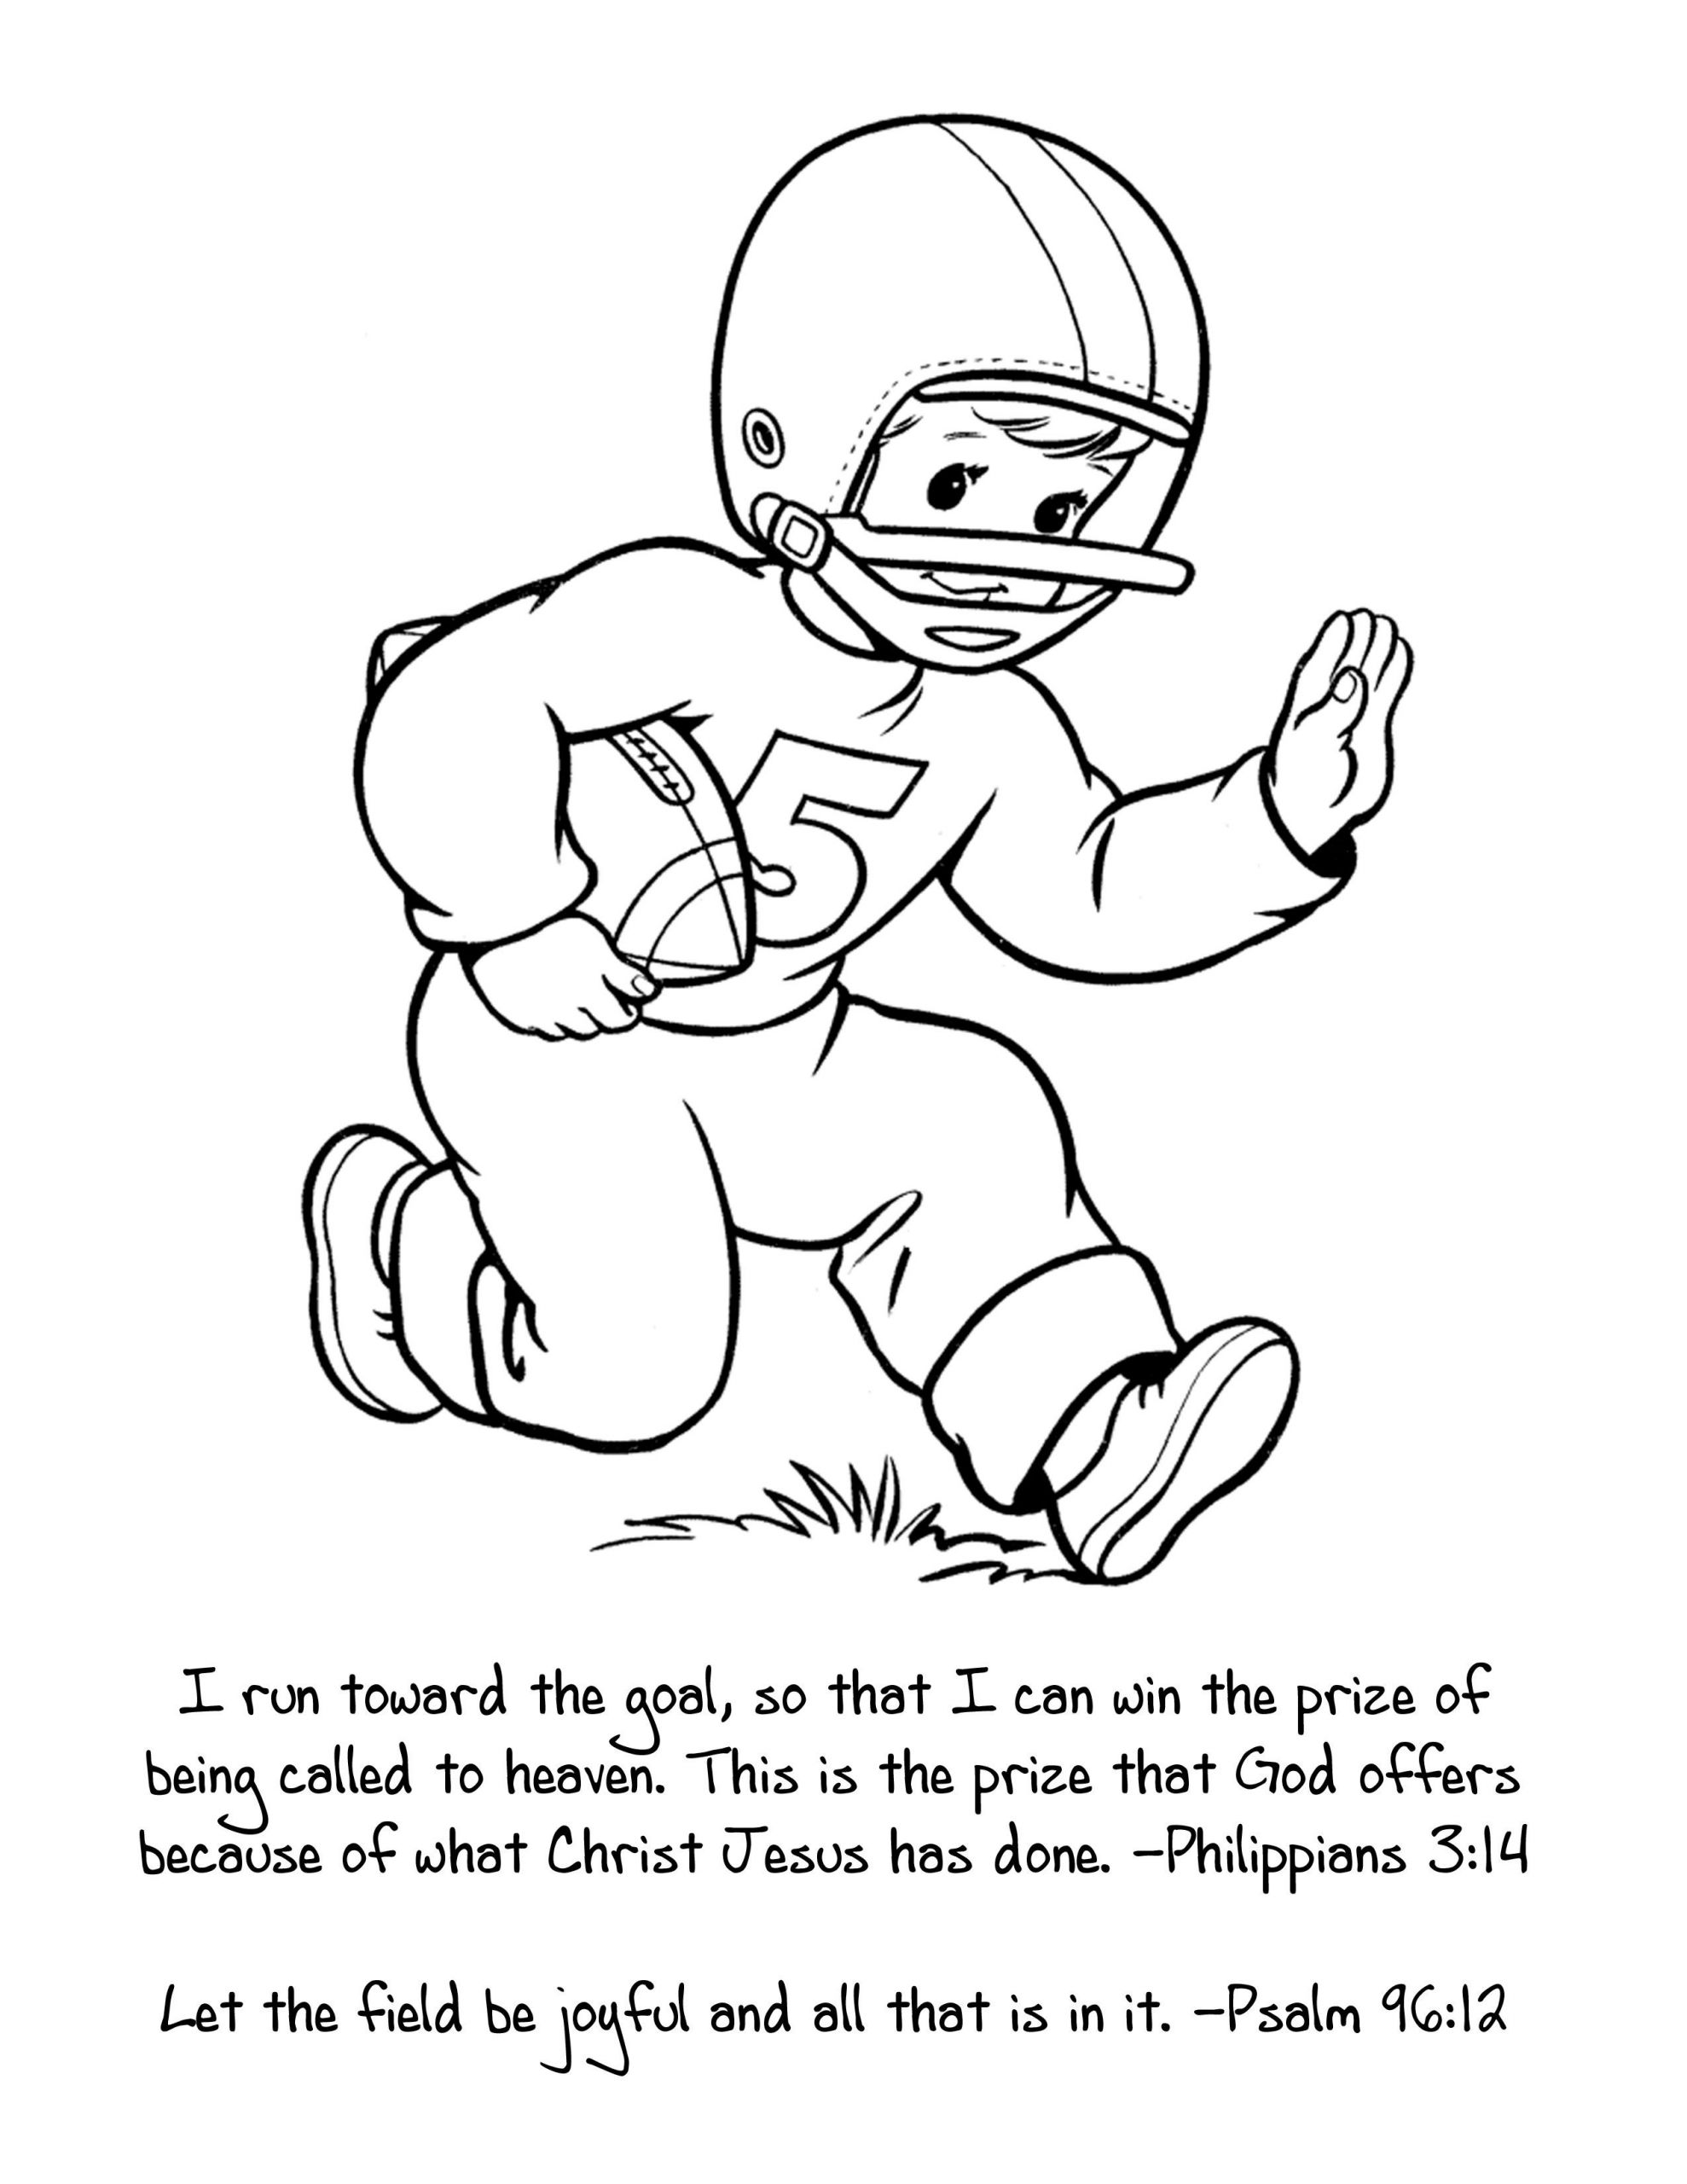 Children Sunday School Coloring Pages
 Perfect Sunday School coloring sheet for Super Bowl Sunday